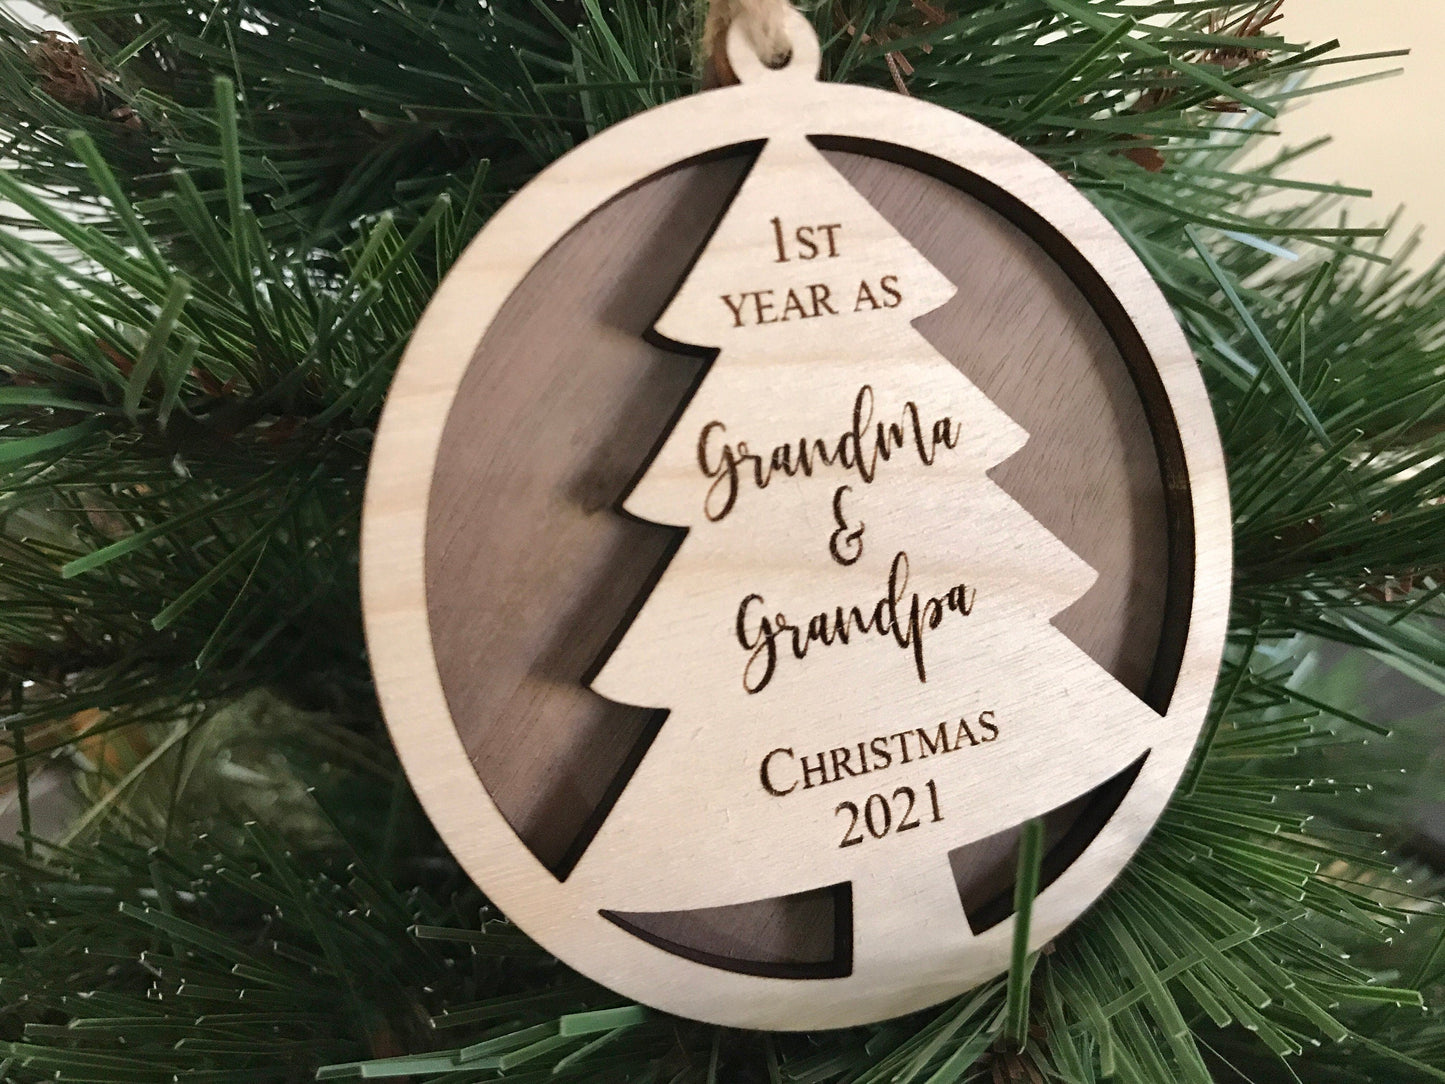 3d our 1st year as grandma and grandpa ornament - Christmas 2023